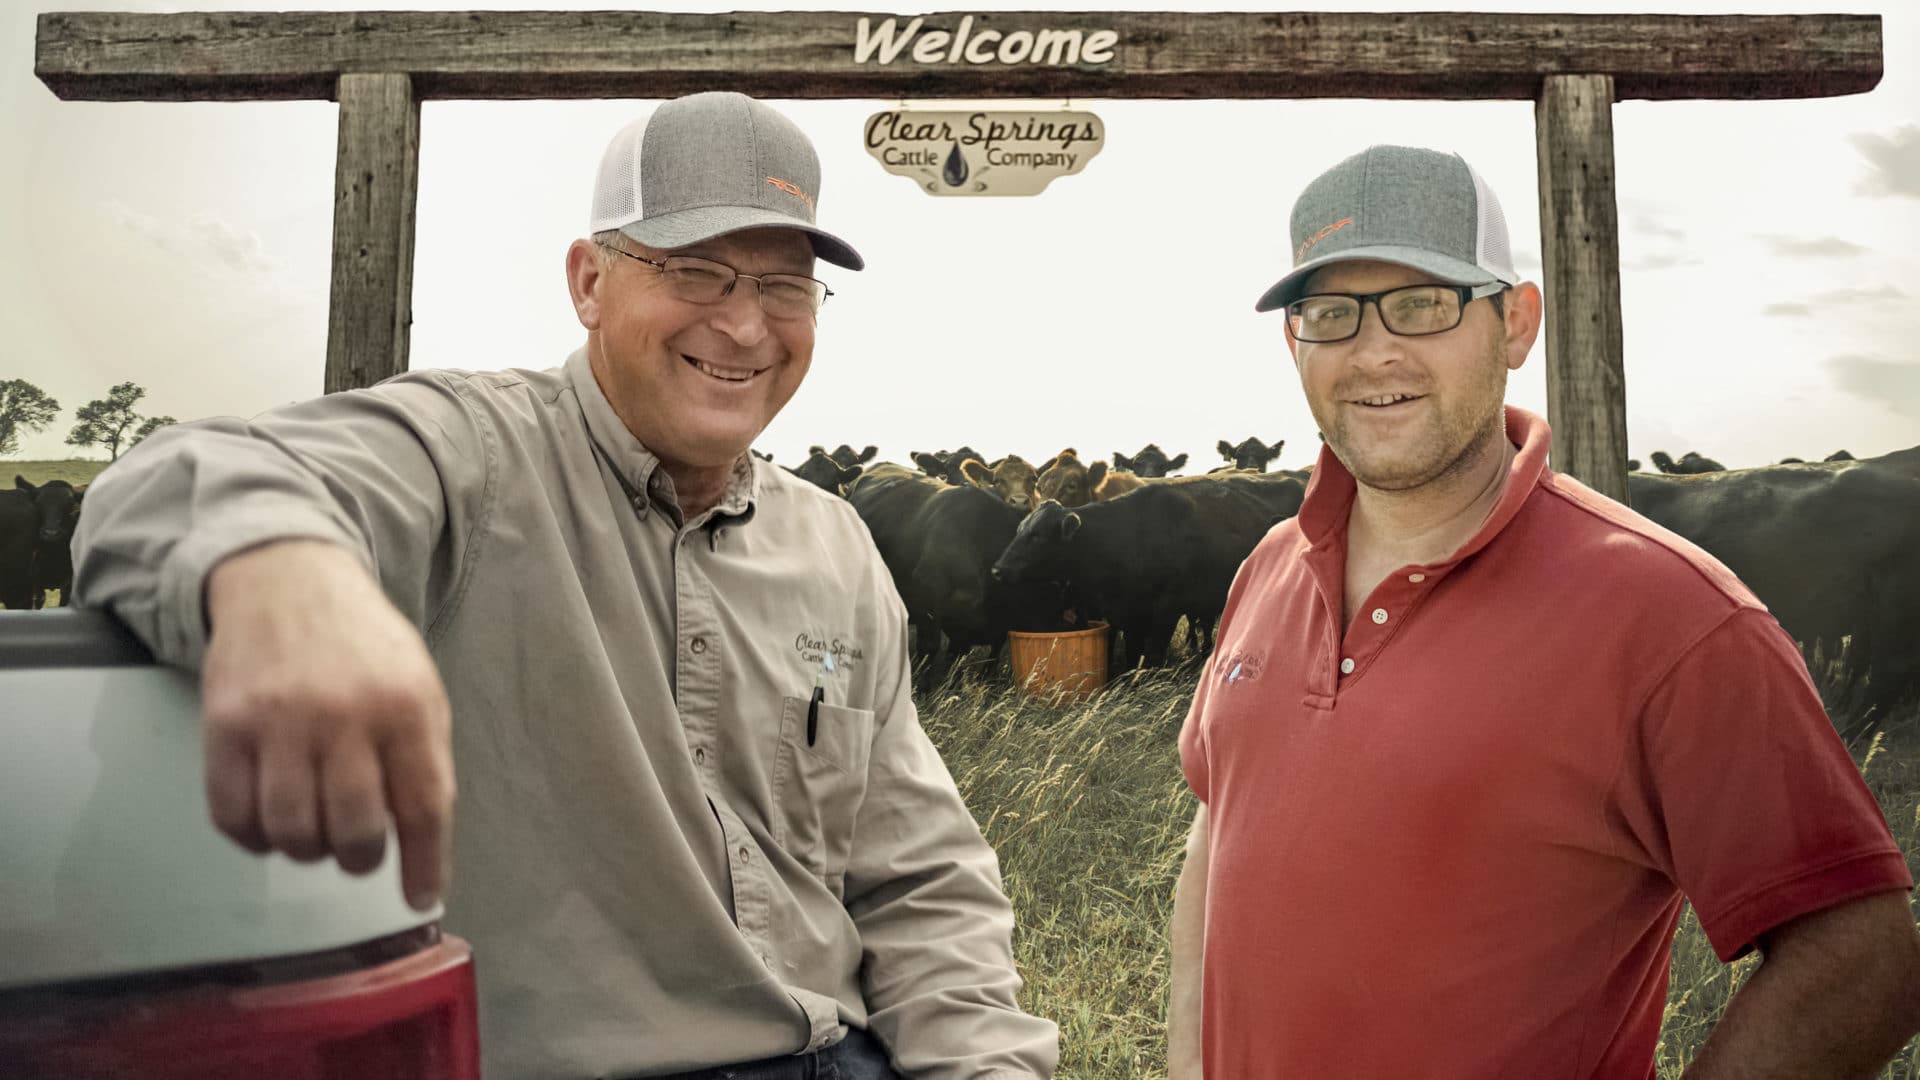 Clear Springs Cattle Co. Customer Journey Creative Thumbnail